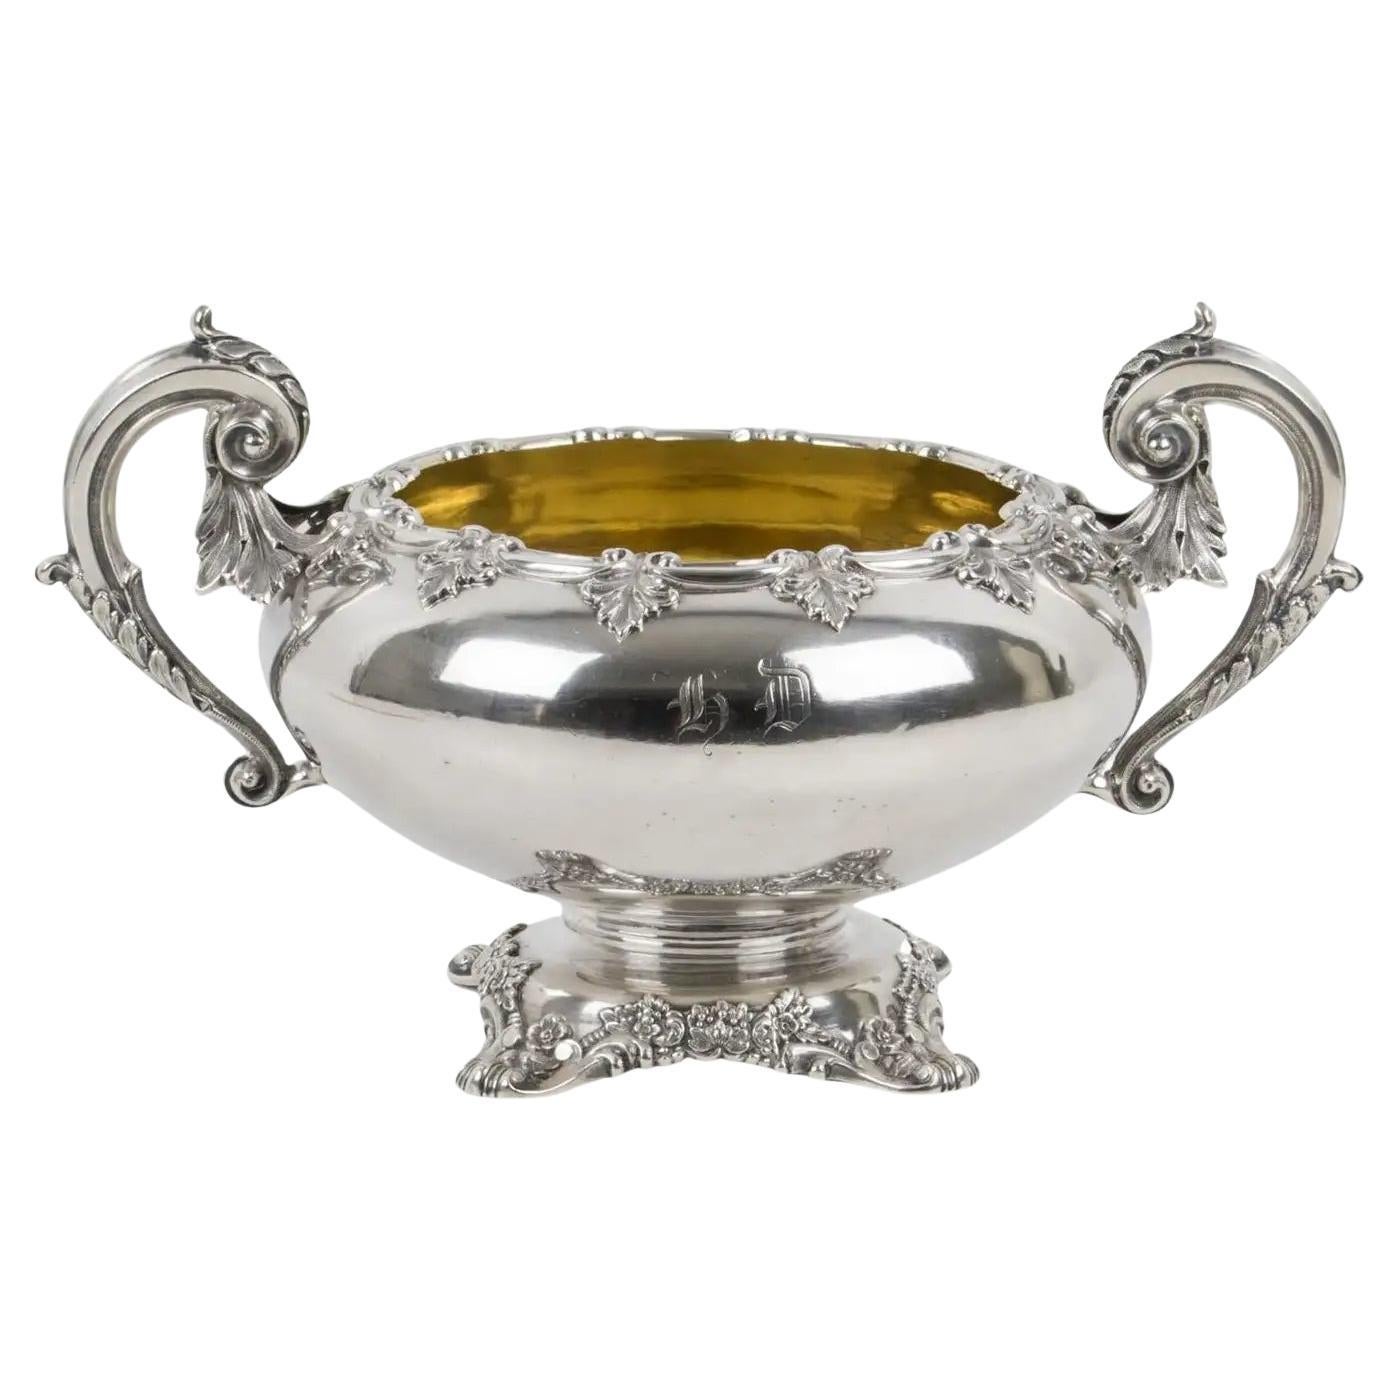 Gustave Odiot Paris 19th Century Sterling Silver Decorative Bowl For Sale